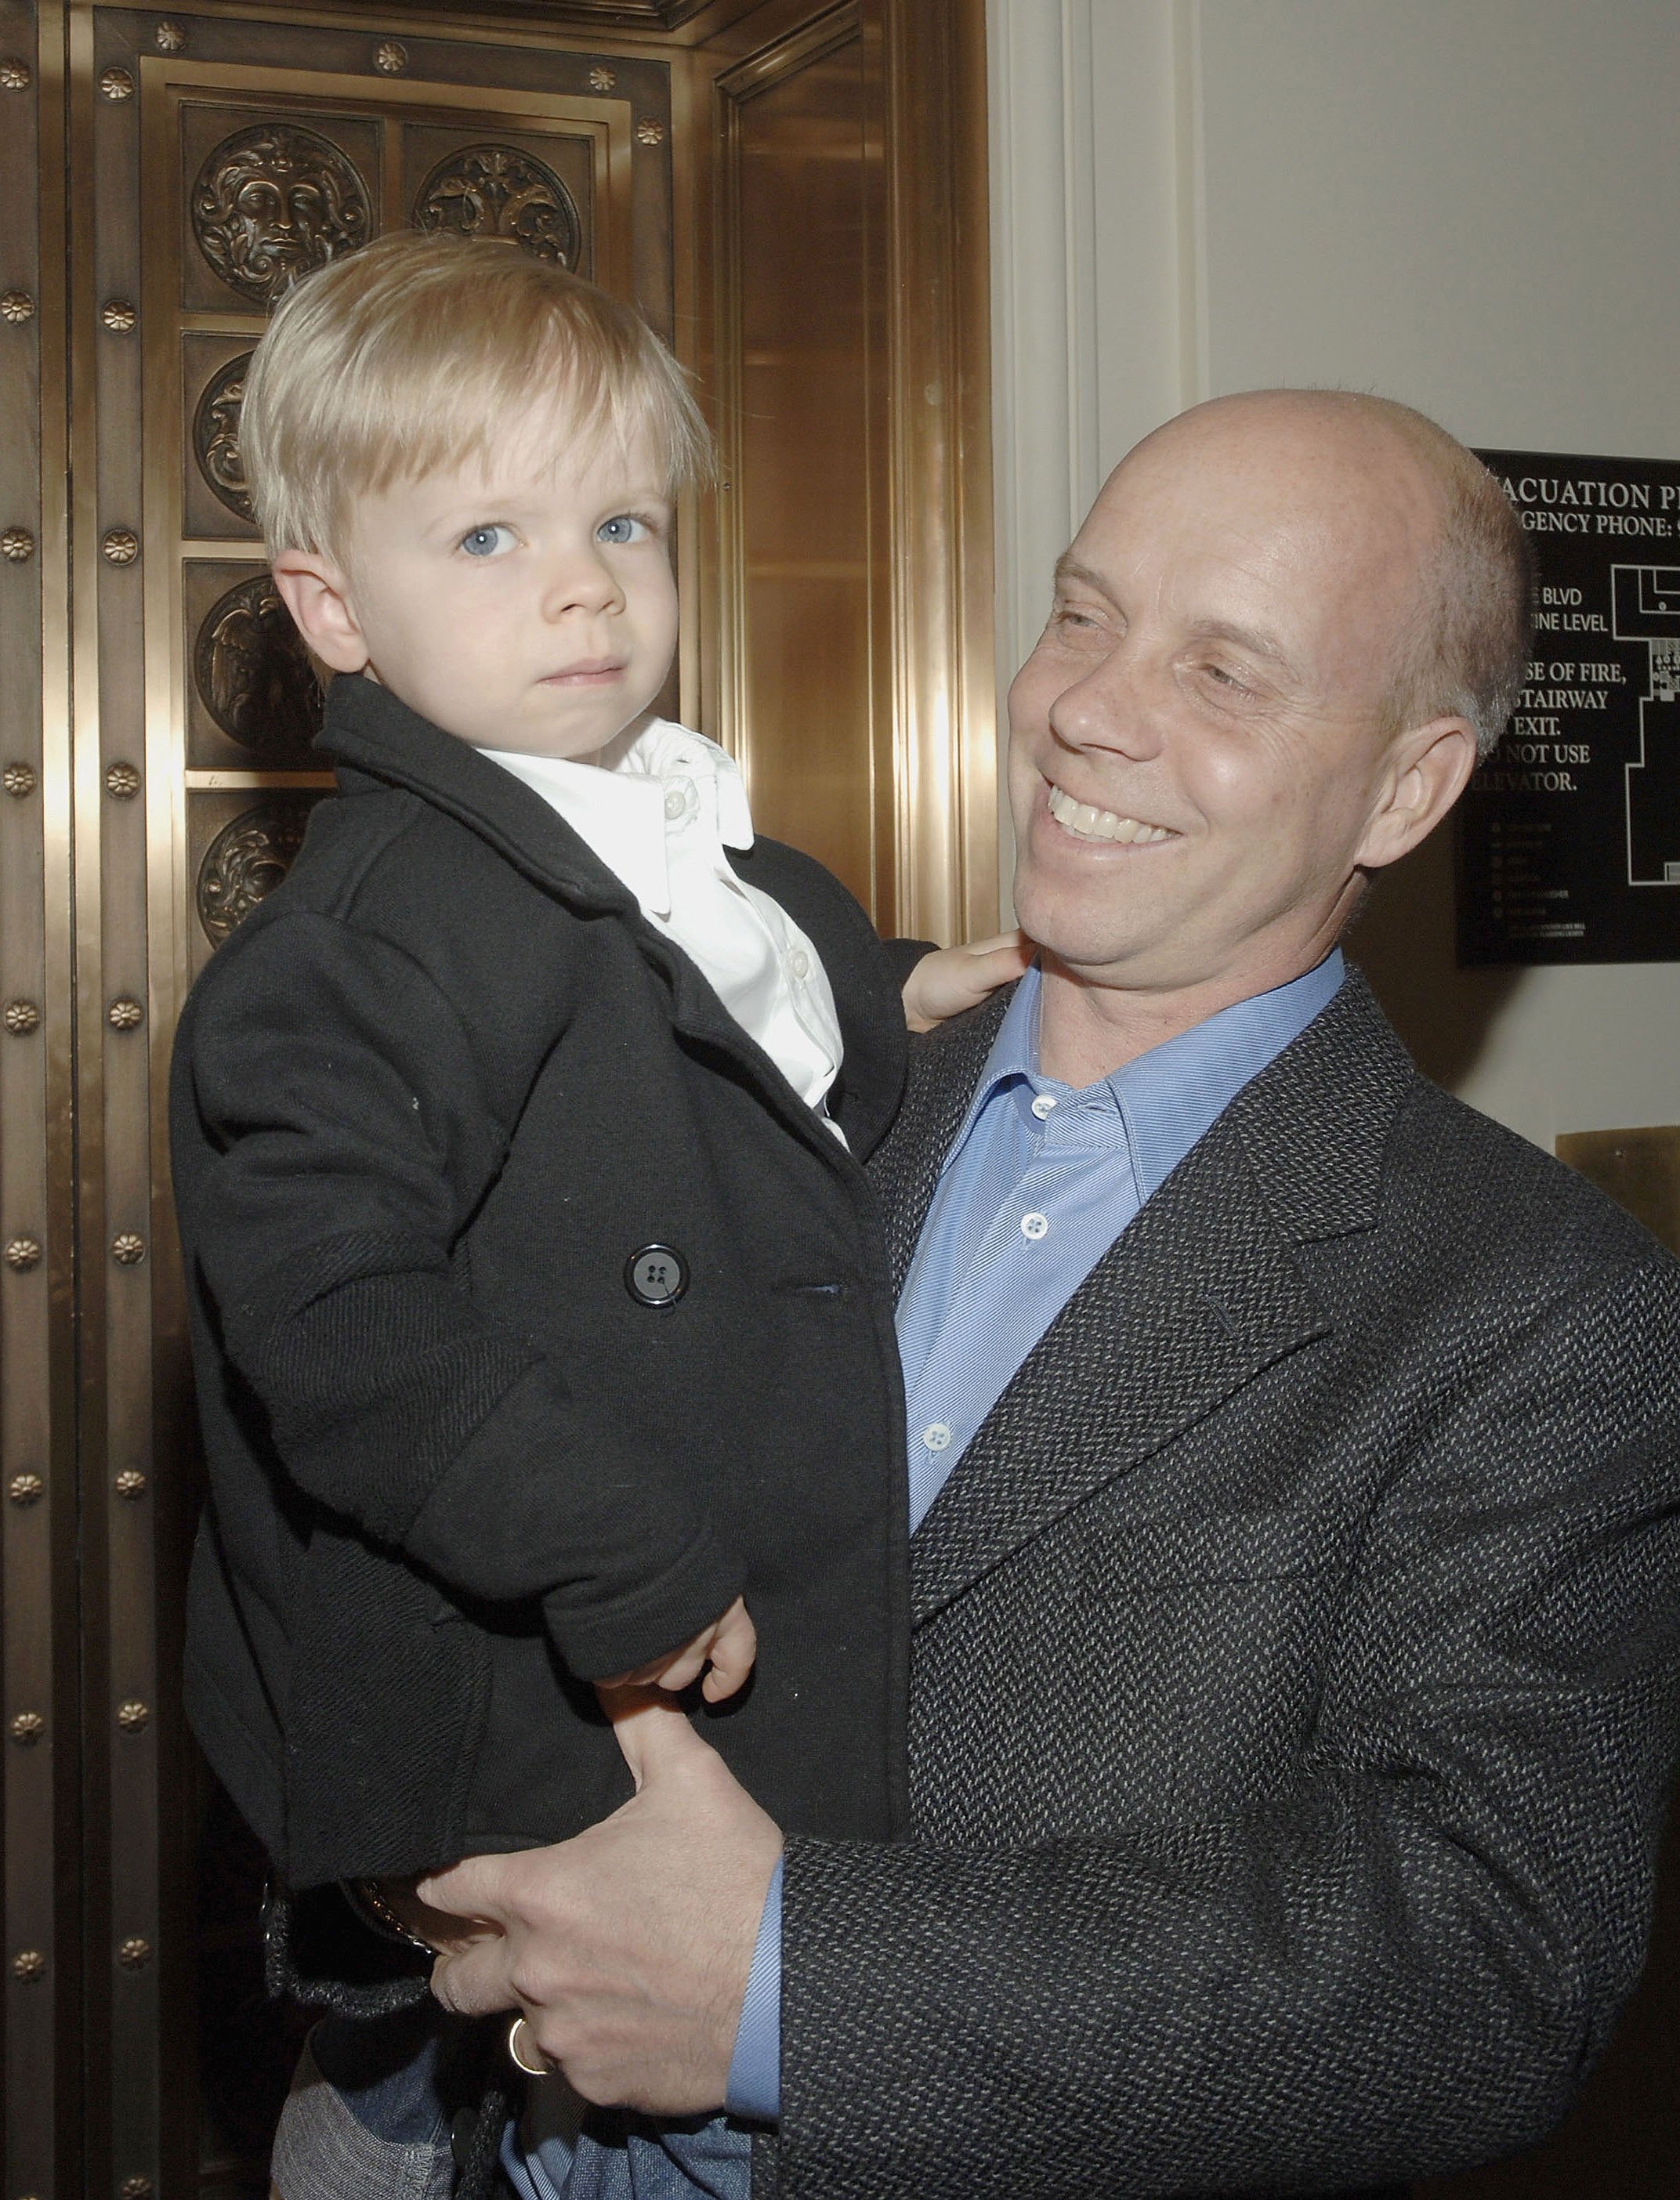 Scott Hamilton and his son Aidan Hamilton at the Luxe Wear Fall/Winter Fashion Show on May 19, 2006 in Beverly Hills, California | Source: Getty Images